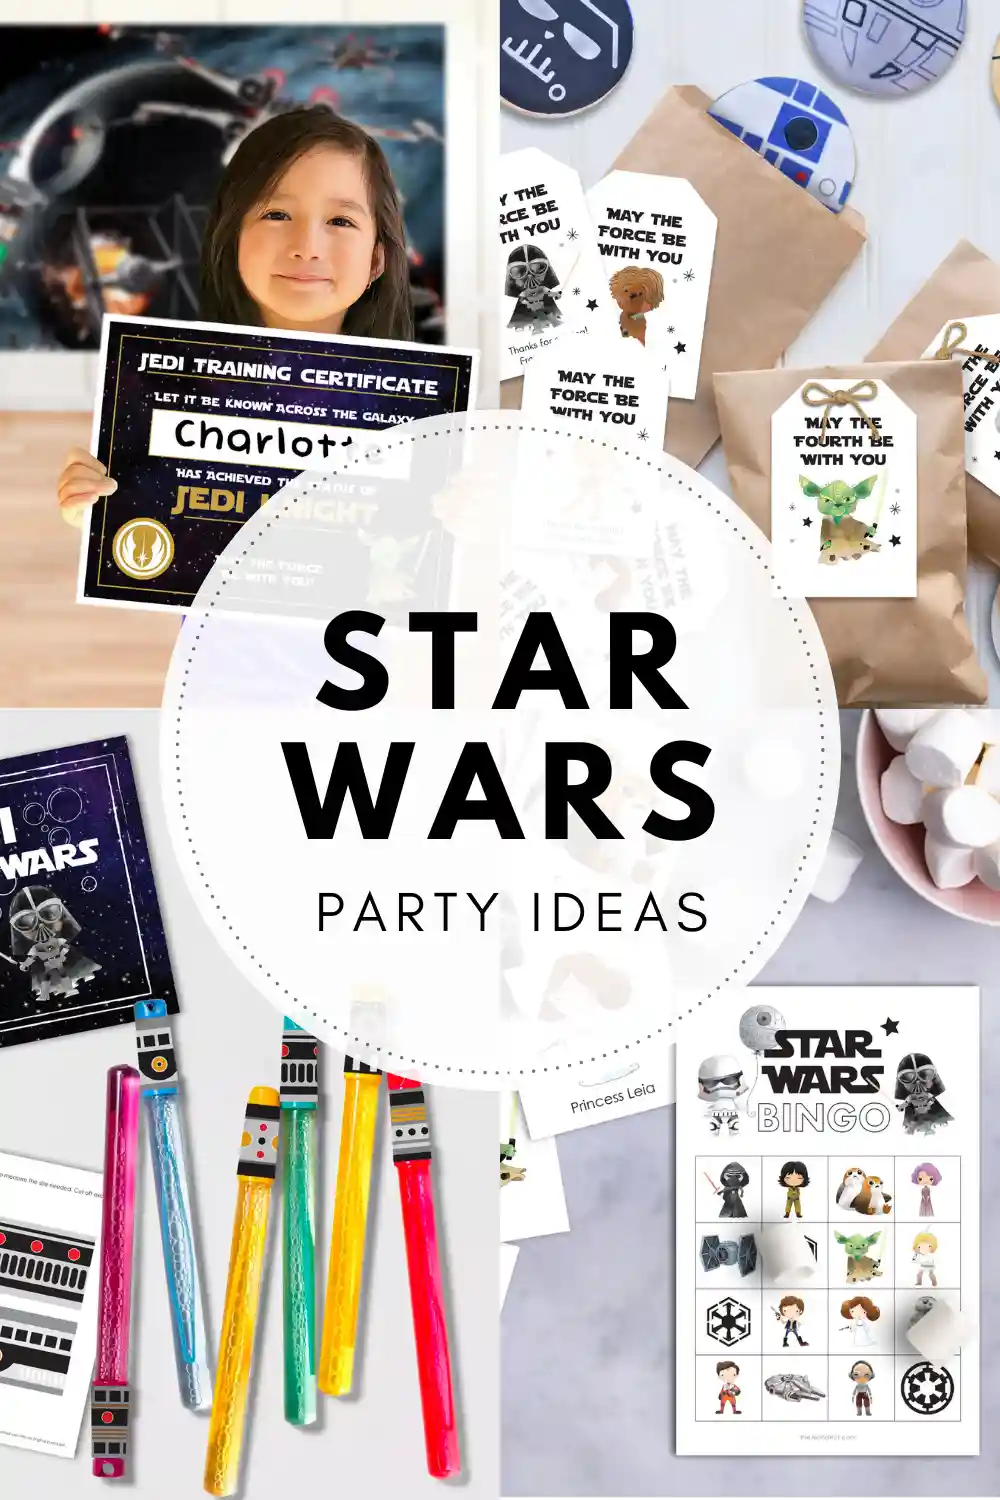 Star Wars party ideas, activities, birthday party games, decorations, and prints. Ideas and tips and tricks for throwing the best Star Wars themed kids birthday party, baby shower, or one with the force celebration. Includes Star Wars printable games, decorations (cupcake toppers, banners, gift tags, characters) and Star Wars party games (BINGO, scavenger hunt, pin the lightsaber on Yoda or Darth Vader). Star wars cupcake toppers and tags.